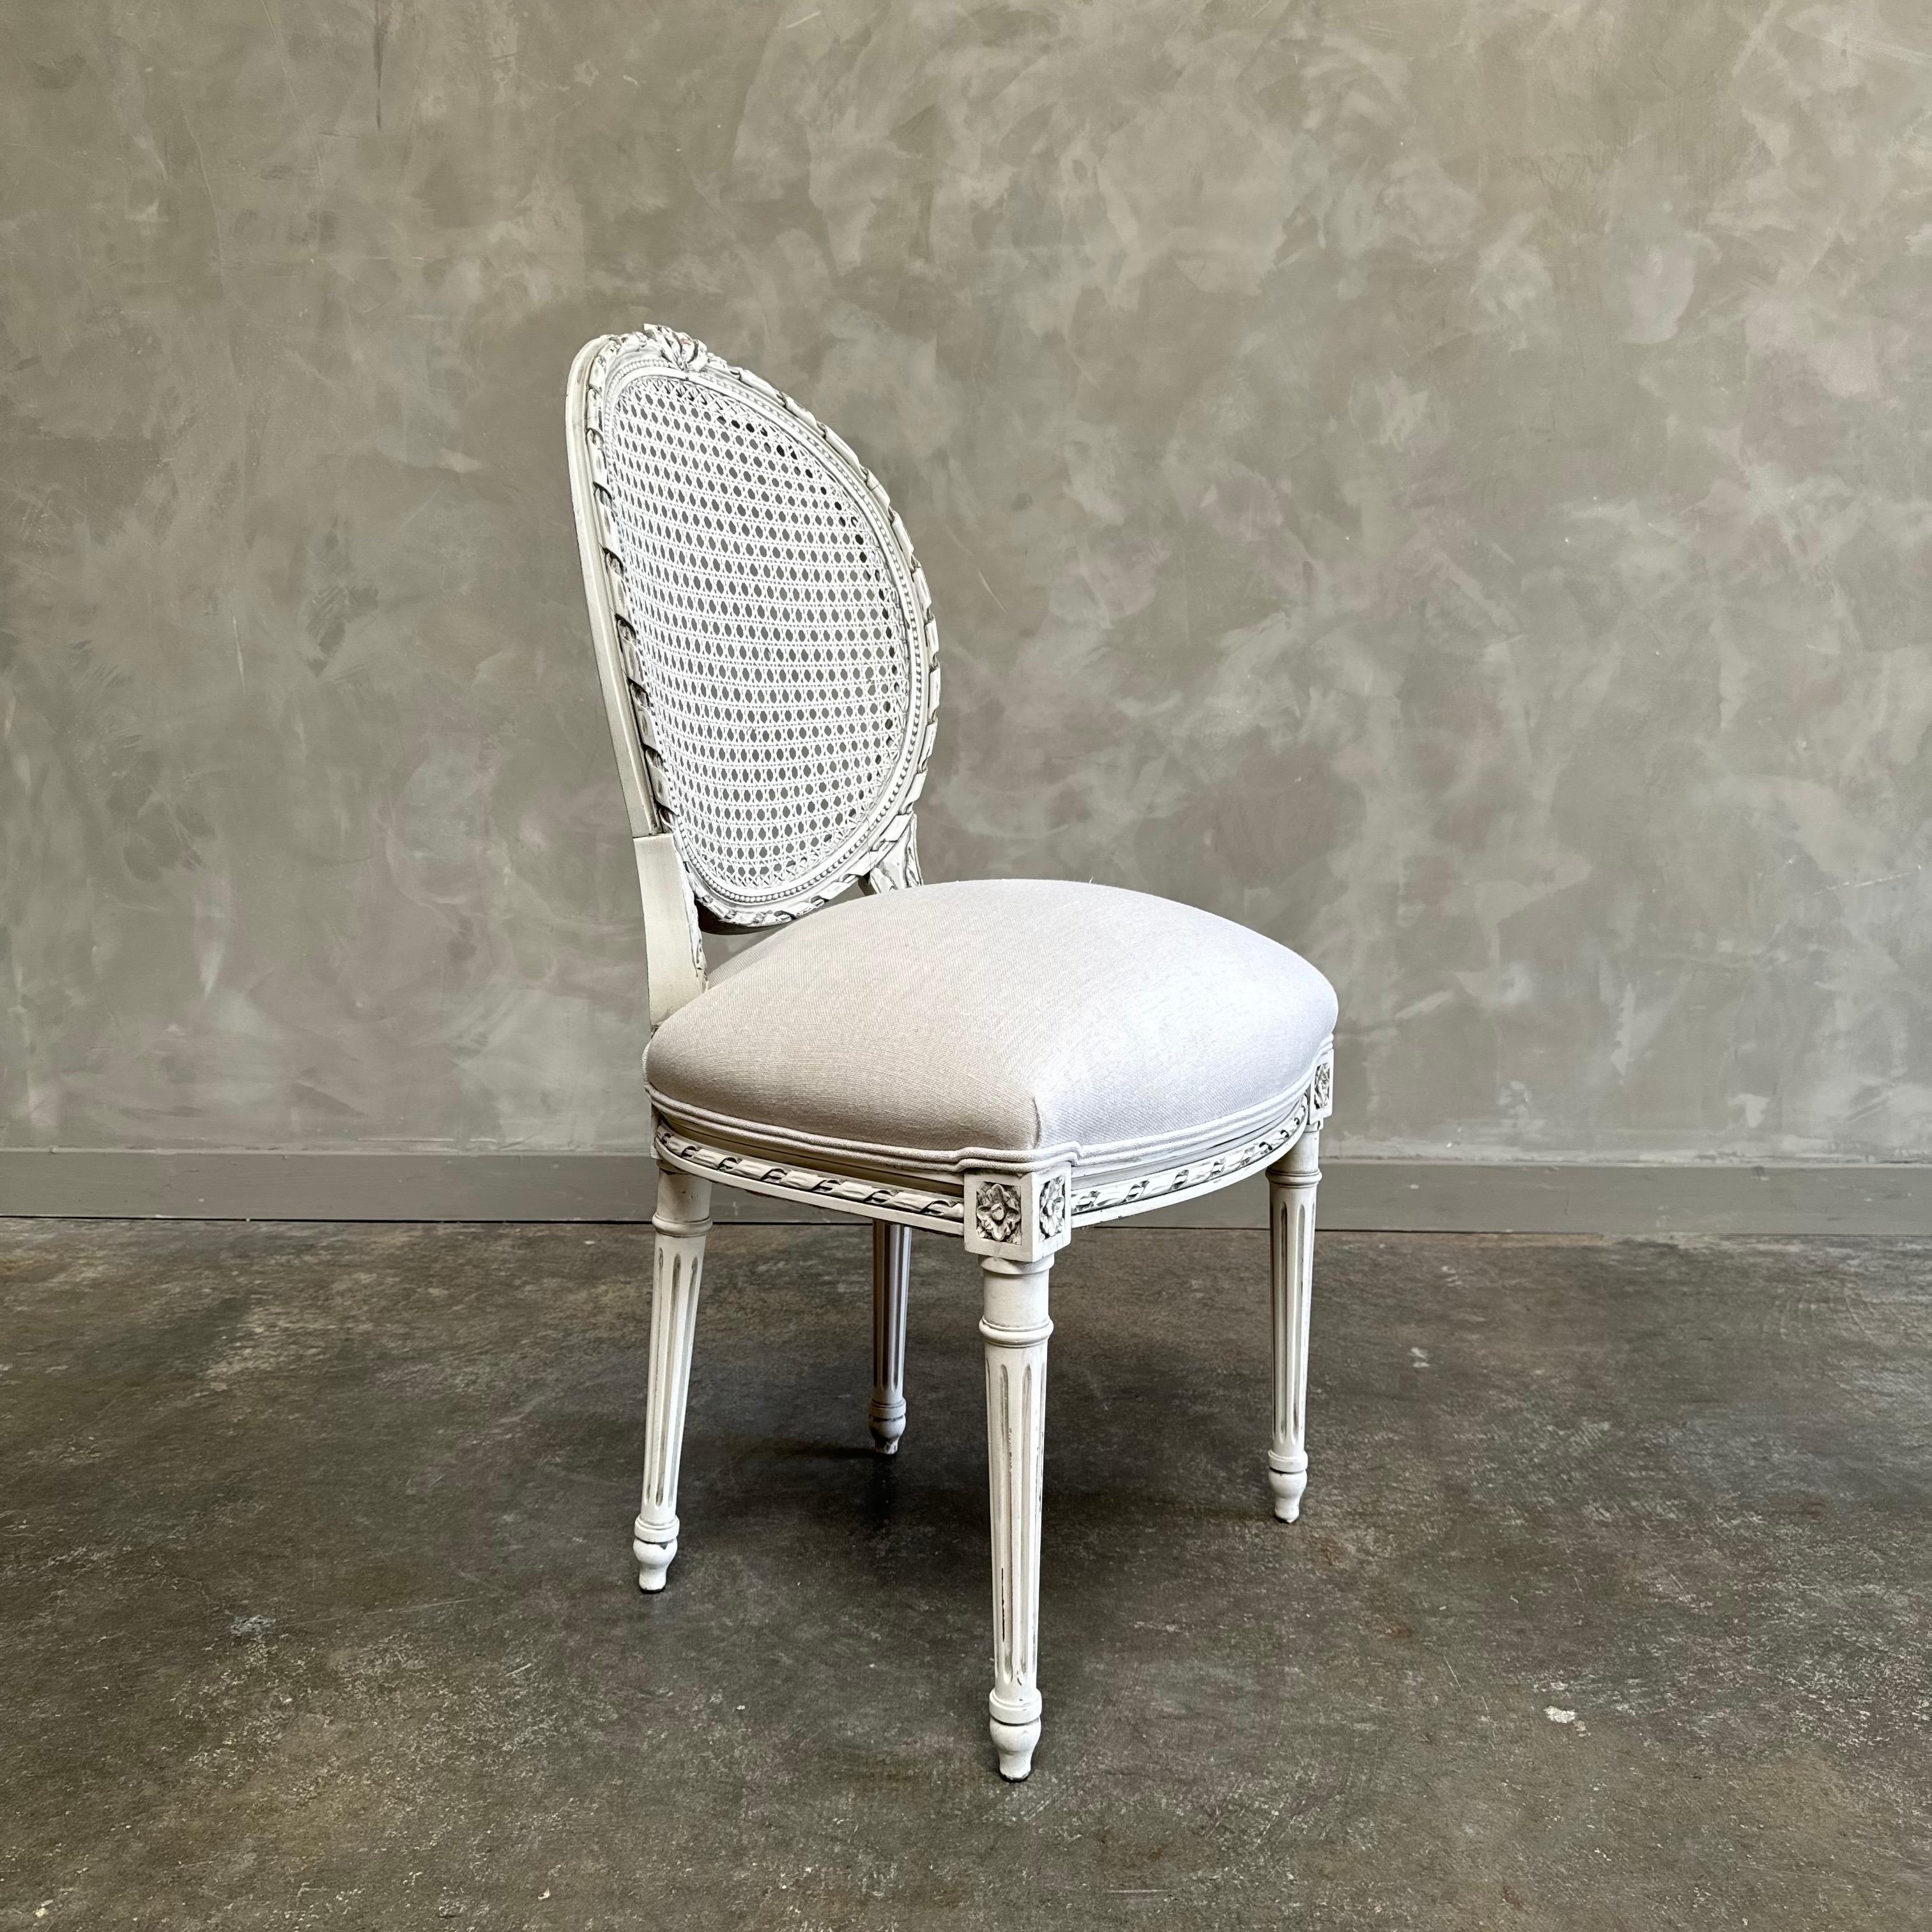 Antique Louis XVI Style French cane back chair in Oyster White Finish In Good Condition For Sale In Brea, CA